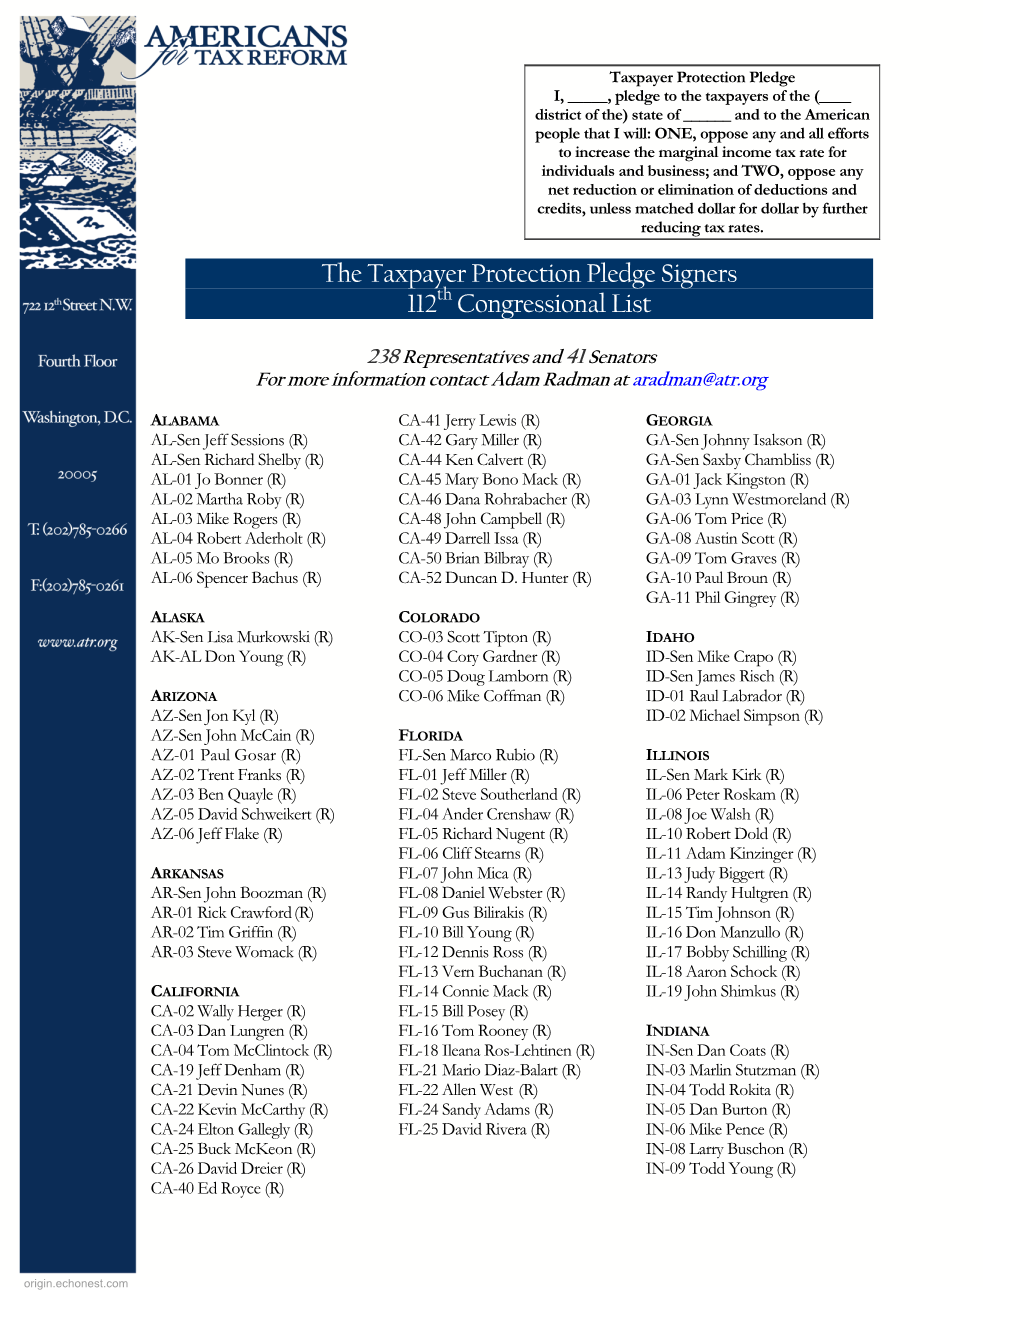 The Taxpayer Protection Pledge Signers 112 Congressional List